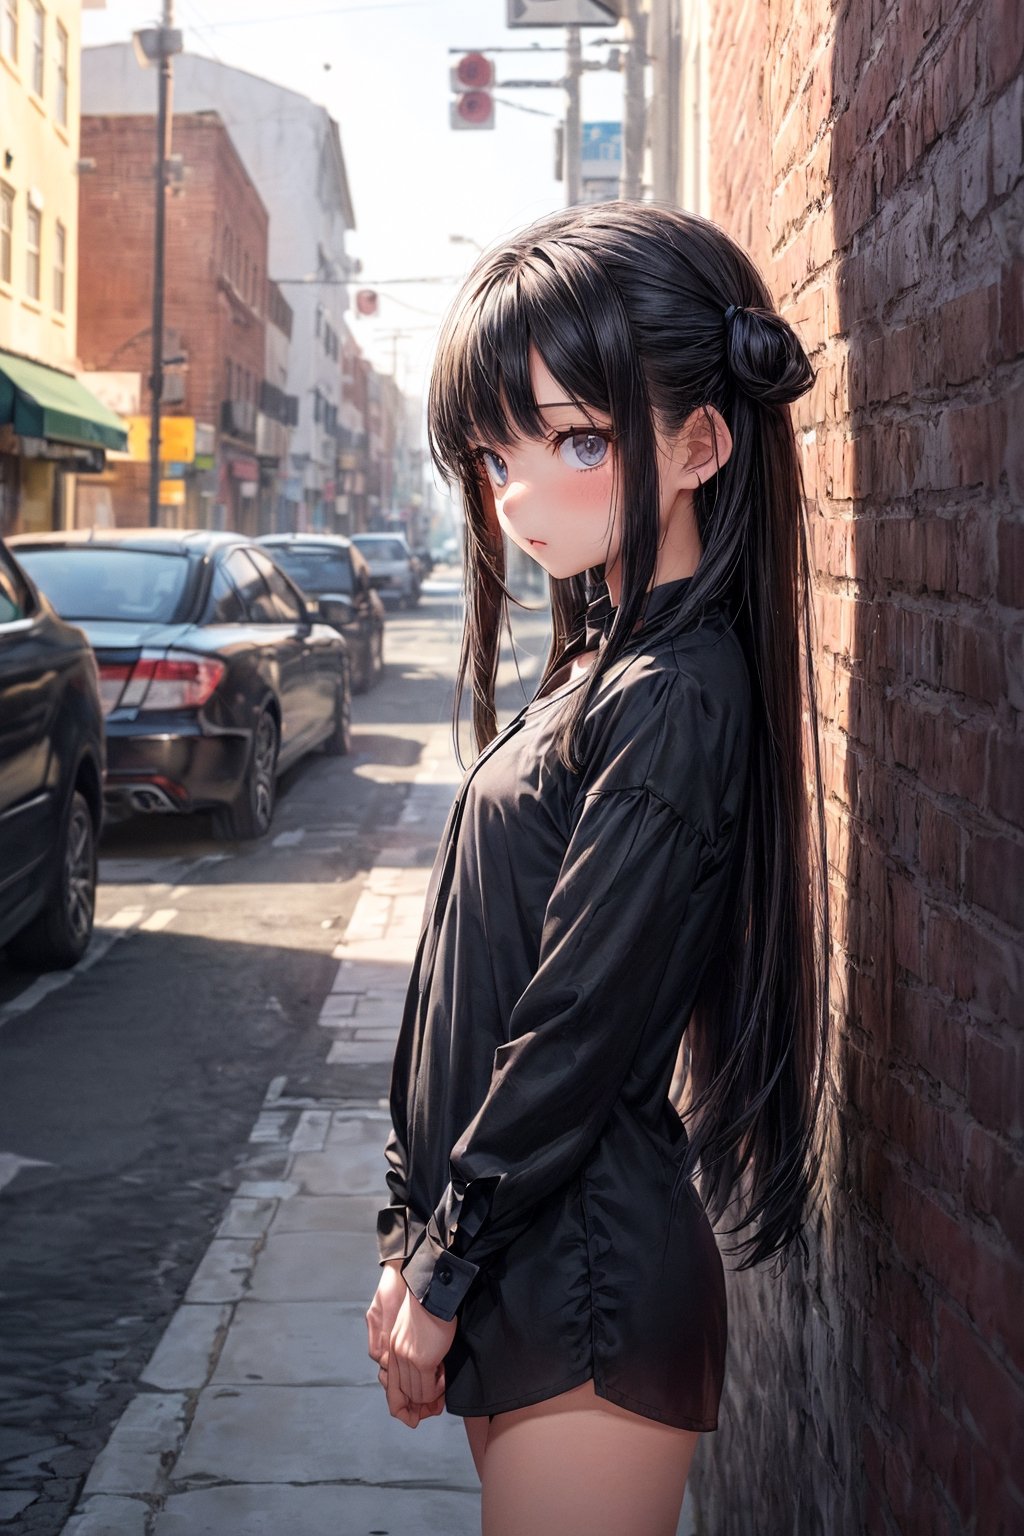 (loli a girl cute:1.3),(realticks:1.5),(she's pure Black half straight long cut hair:1.2), She is waiting for someone on the street corner,(menhera:1.3), She is standing,(she's wearing black Thin shirt fabric minimum one-piece:1.3),Brick wall background,look at side